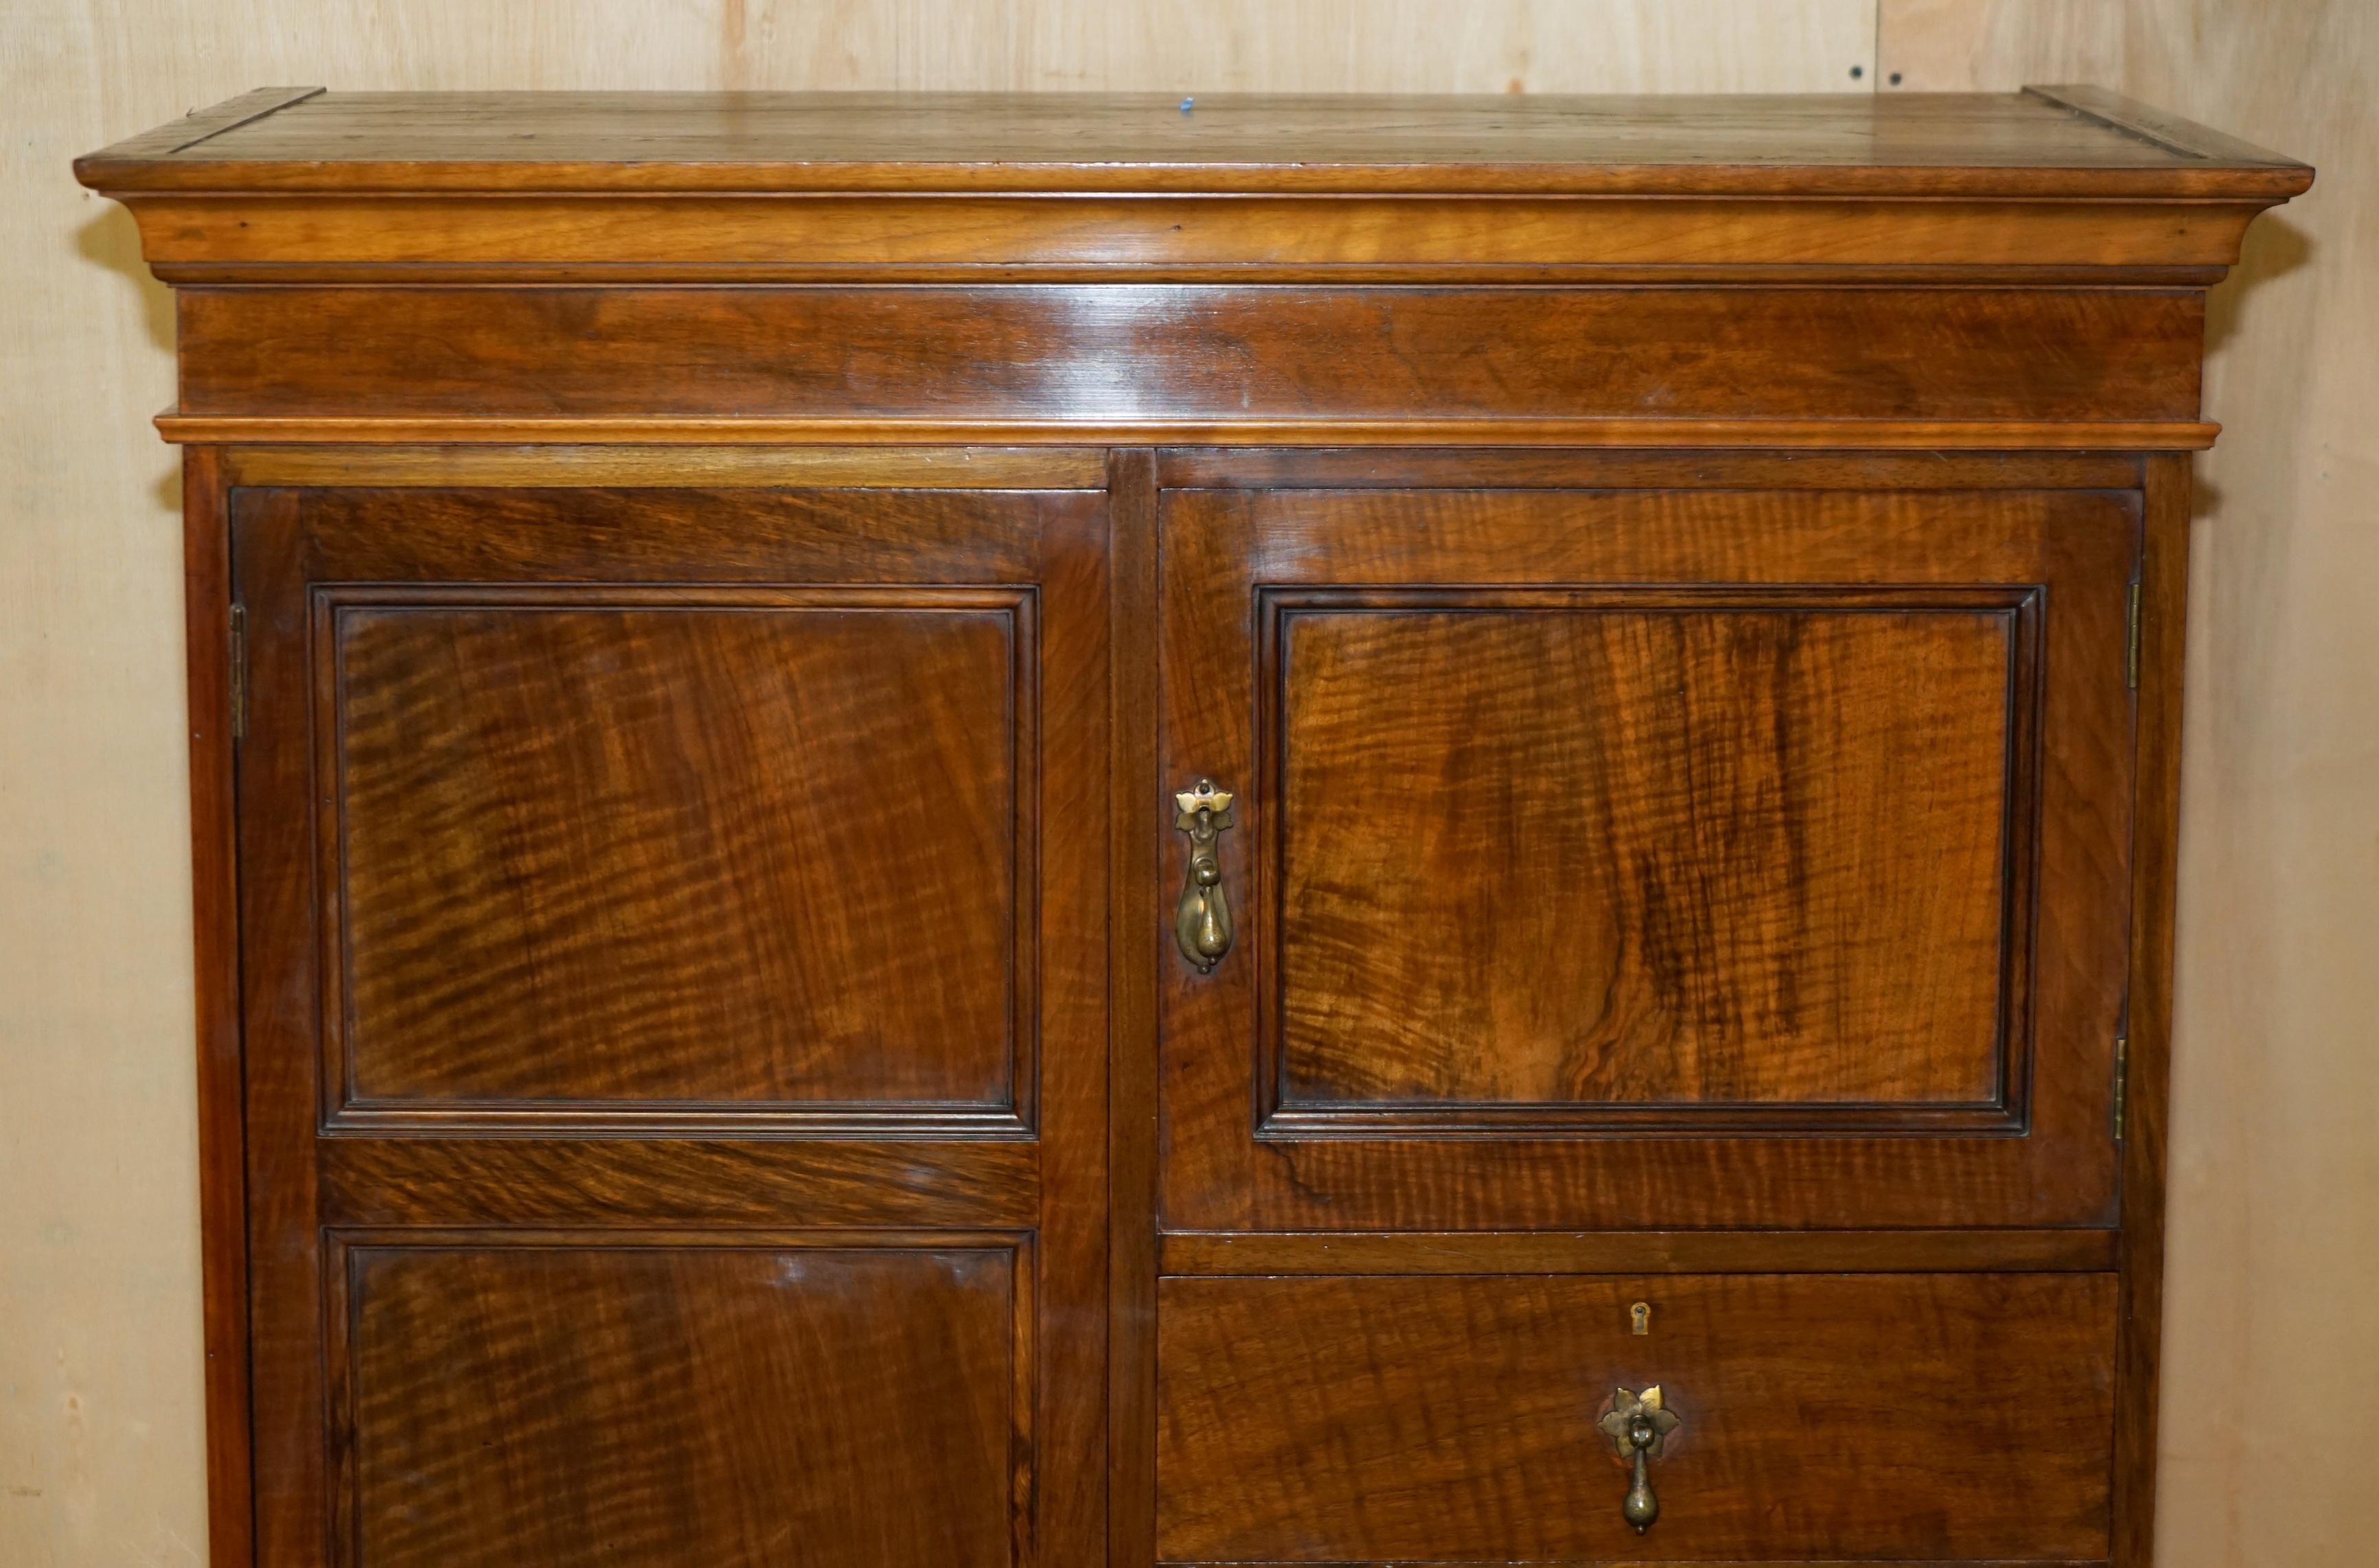 Victorian FULLY RESTORED ANTiQUE LIBERTY & CO VICTORIAN WARDROBE COMPENDIUM WITH DRAWERS For Sale